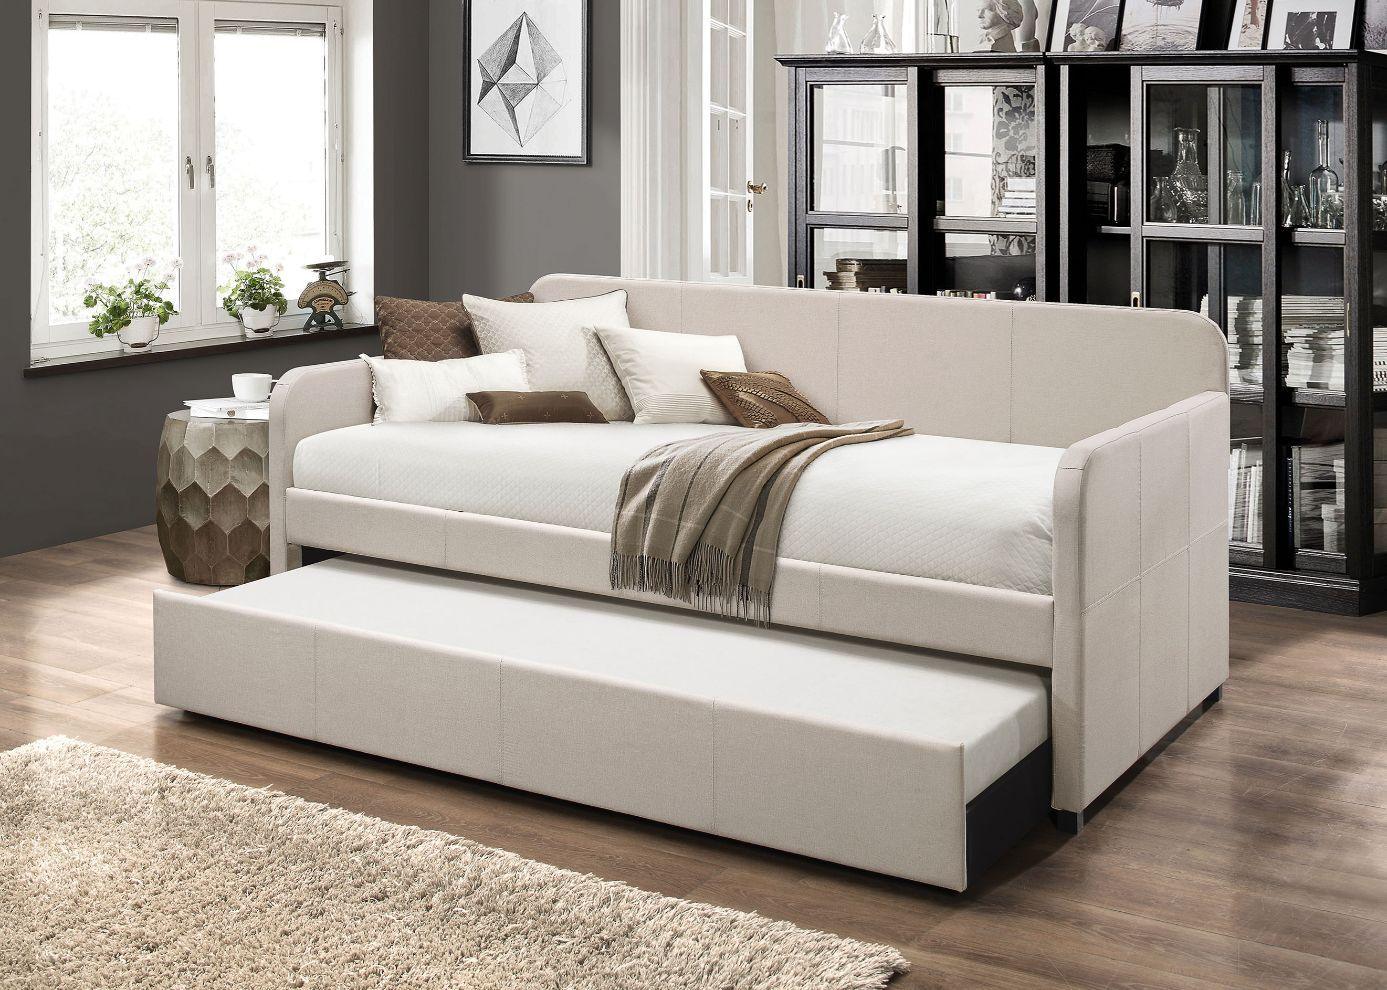 ACME - Jagger - Daybed - Fog Fabric - 5th Avenue Furniture